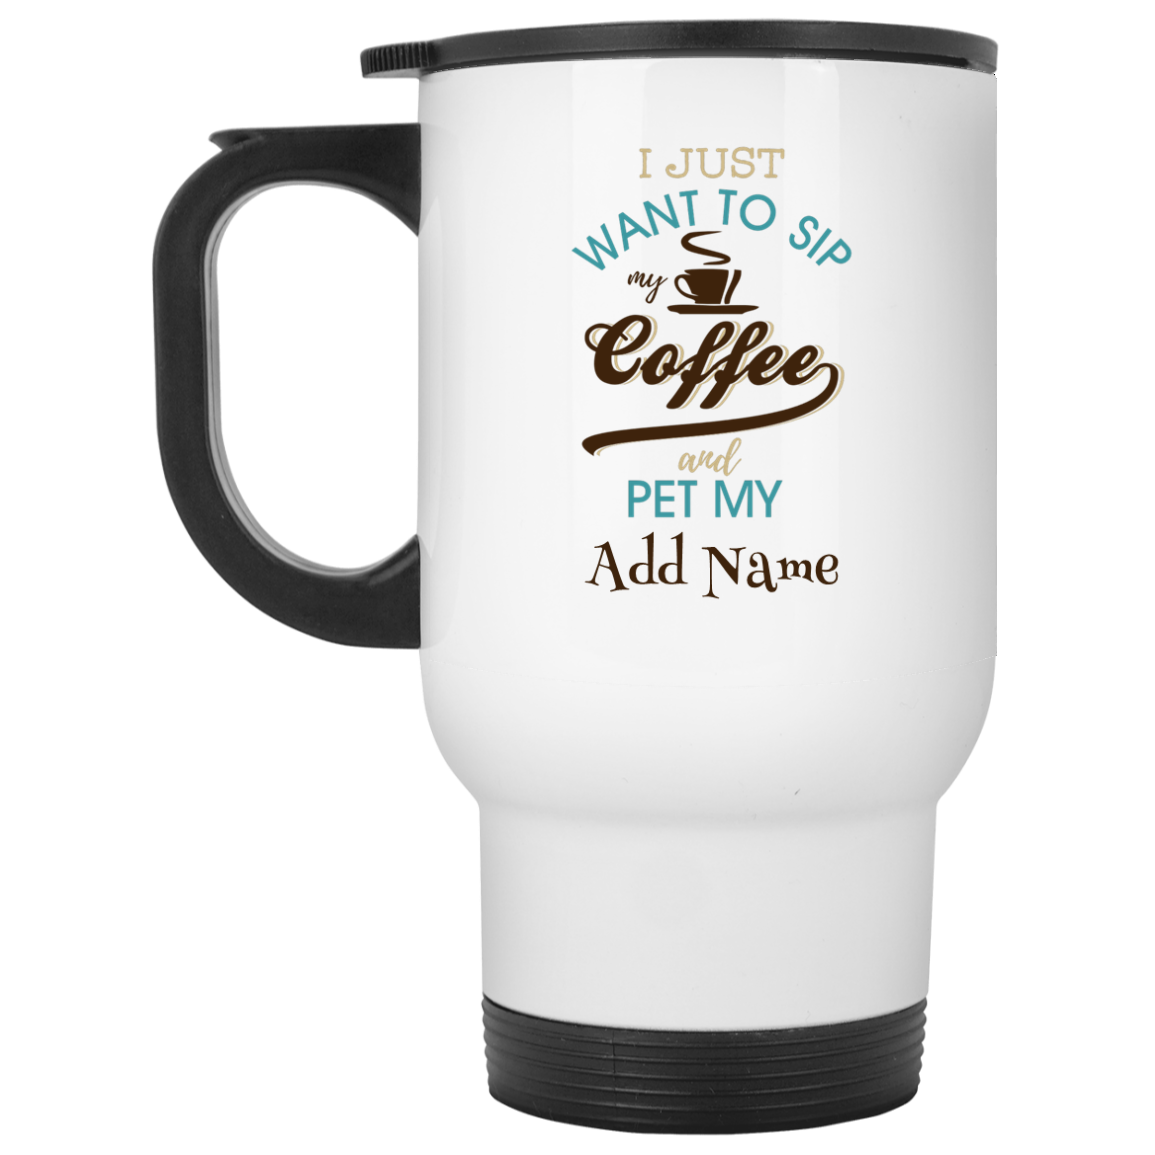 Personalized Need Coffee Travel Mug With Name